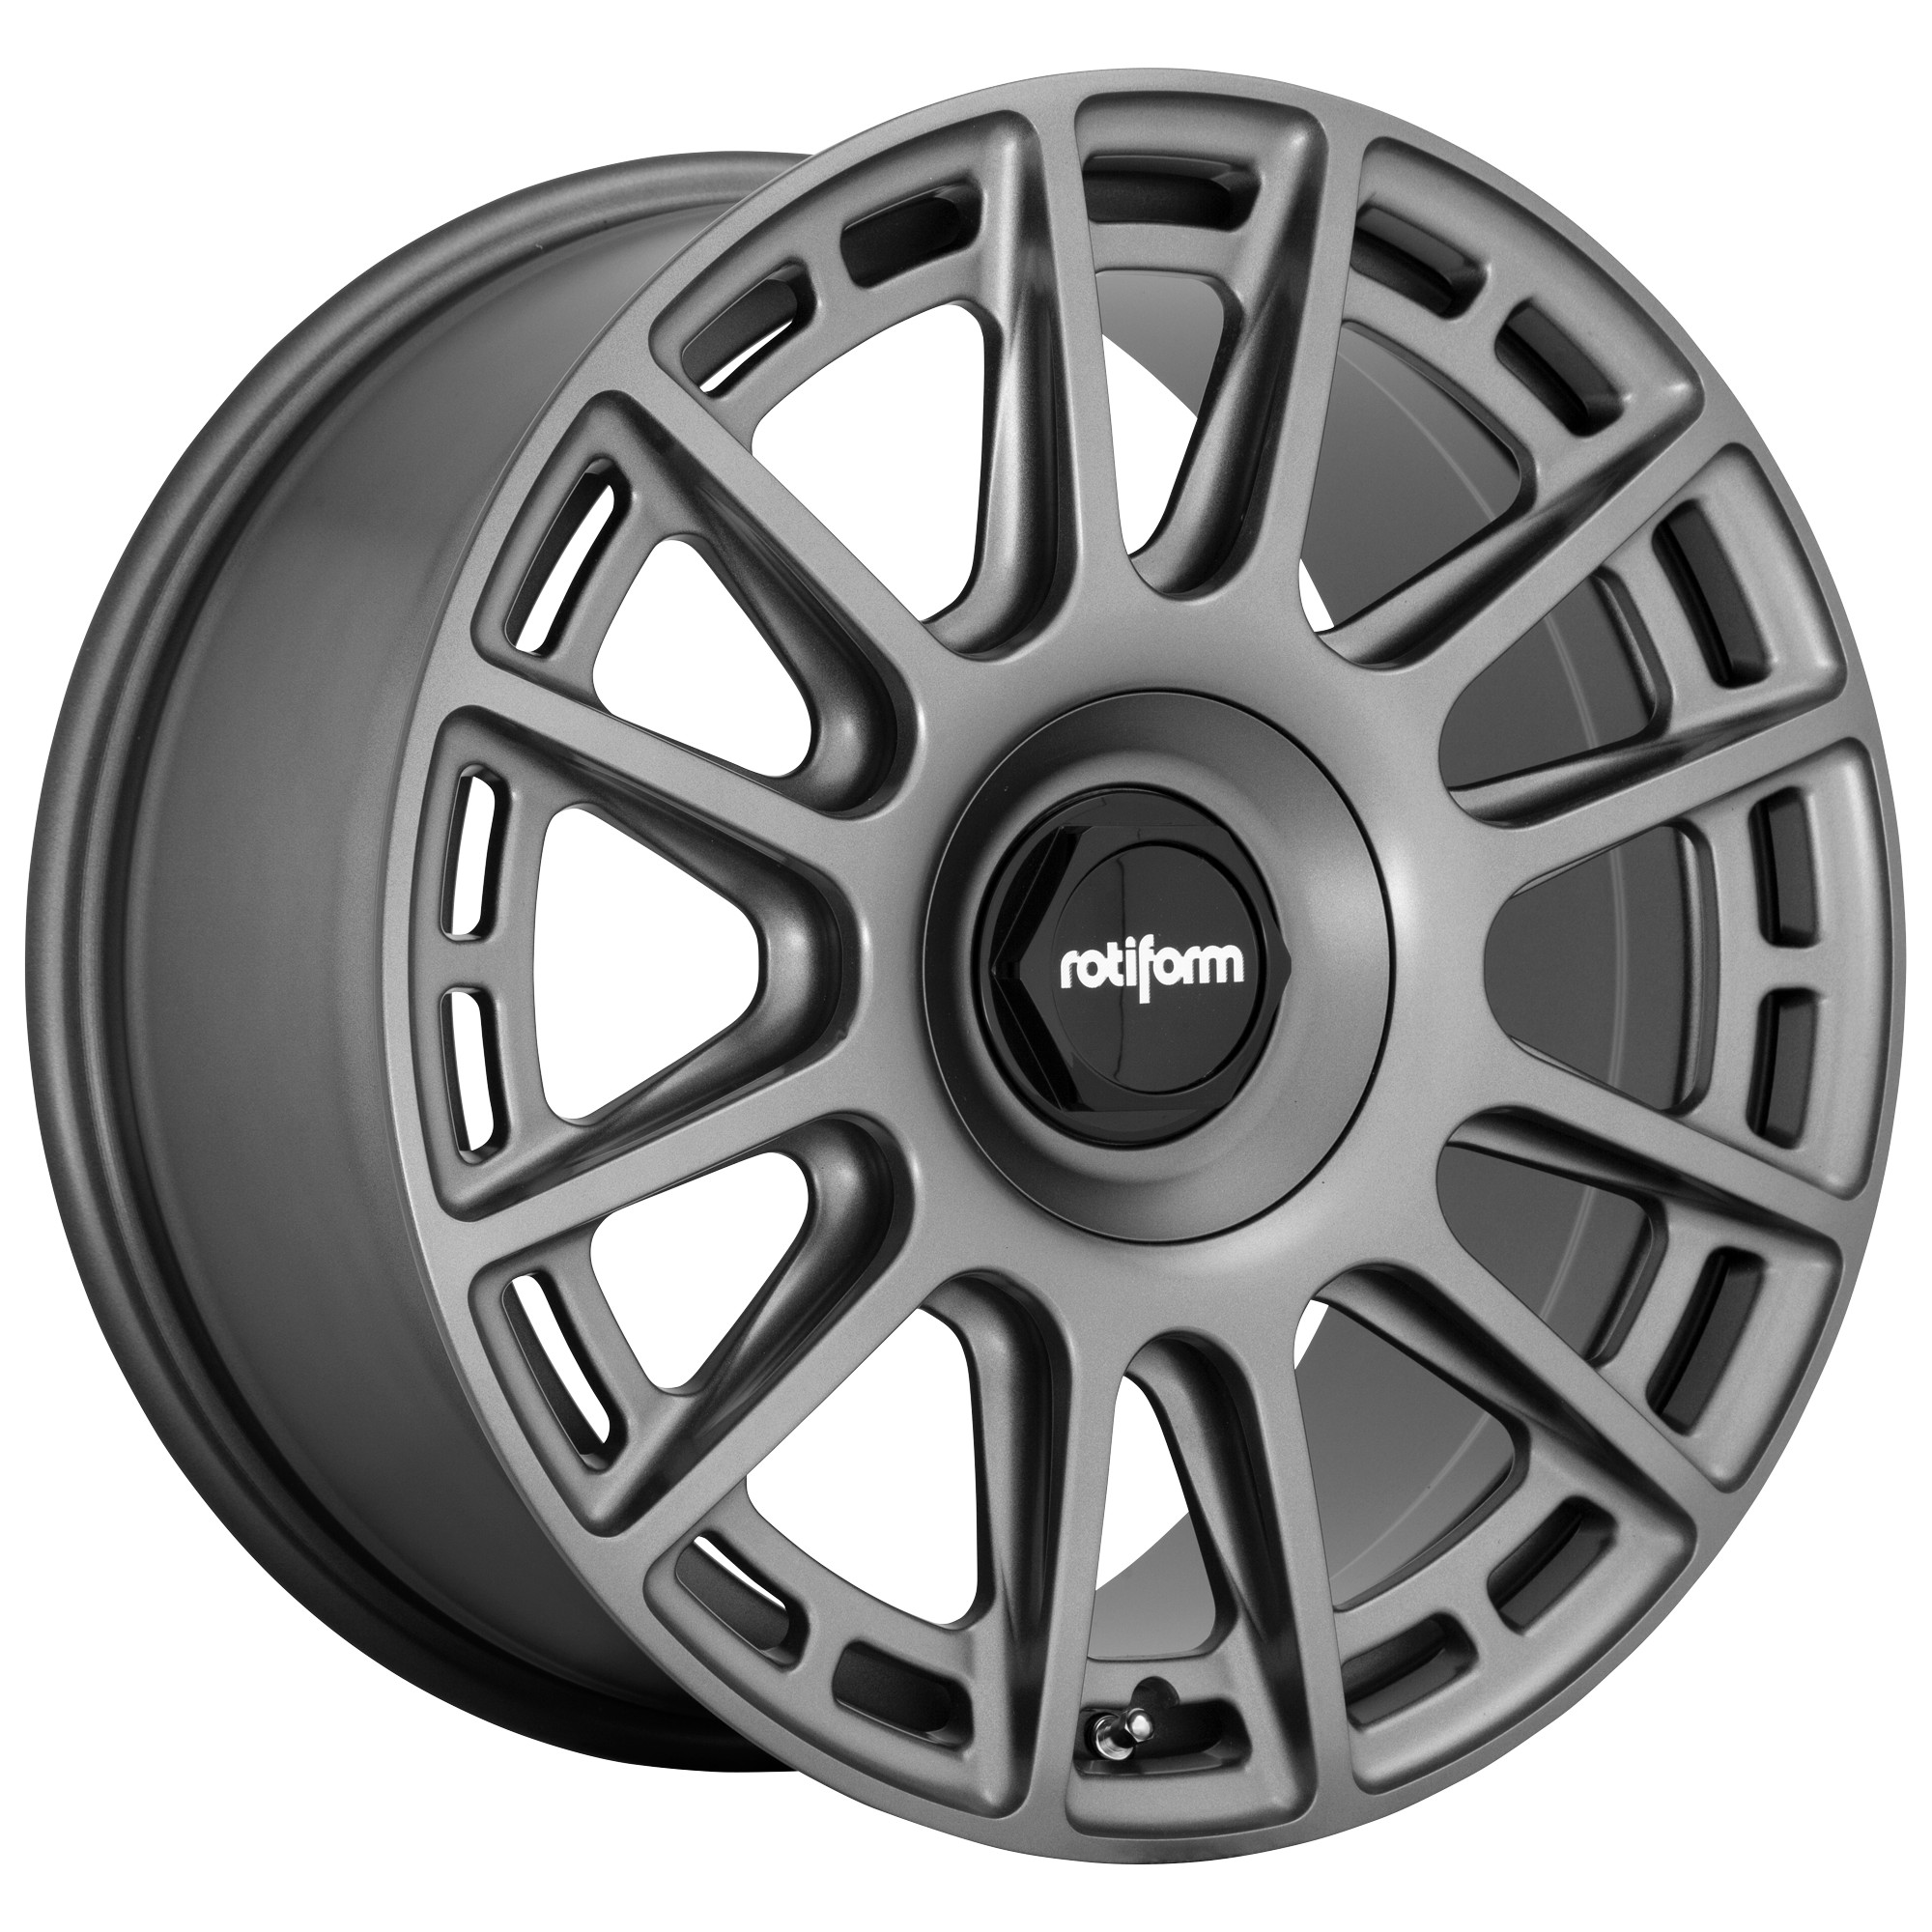 OZR 19x8.5 5x114.30/5x120.00 MATTE ANTHRACITE (35 mm) - Tires and Engine Performance